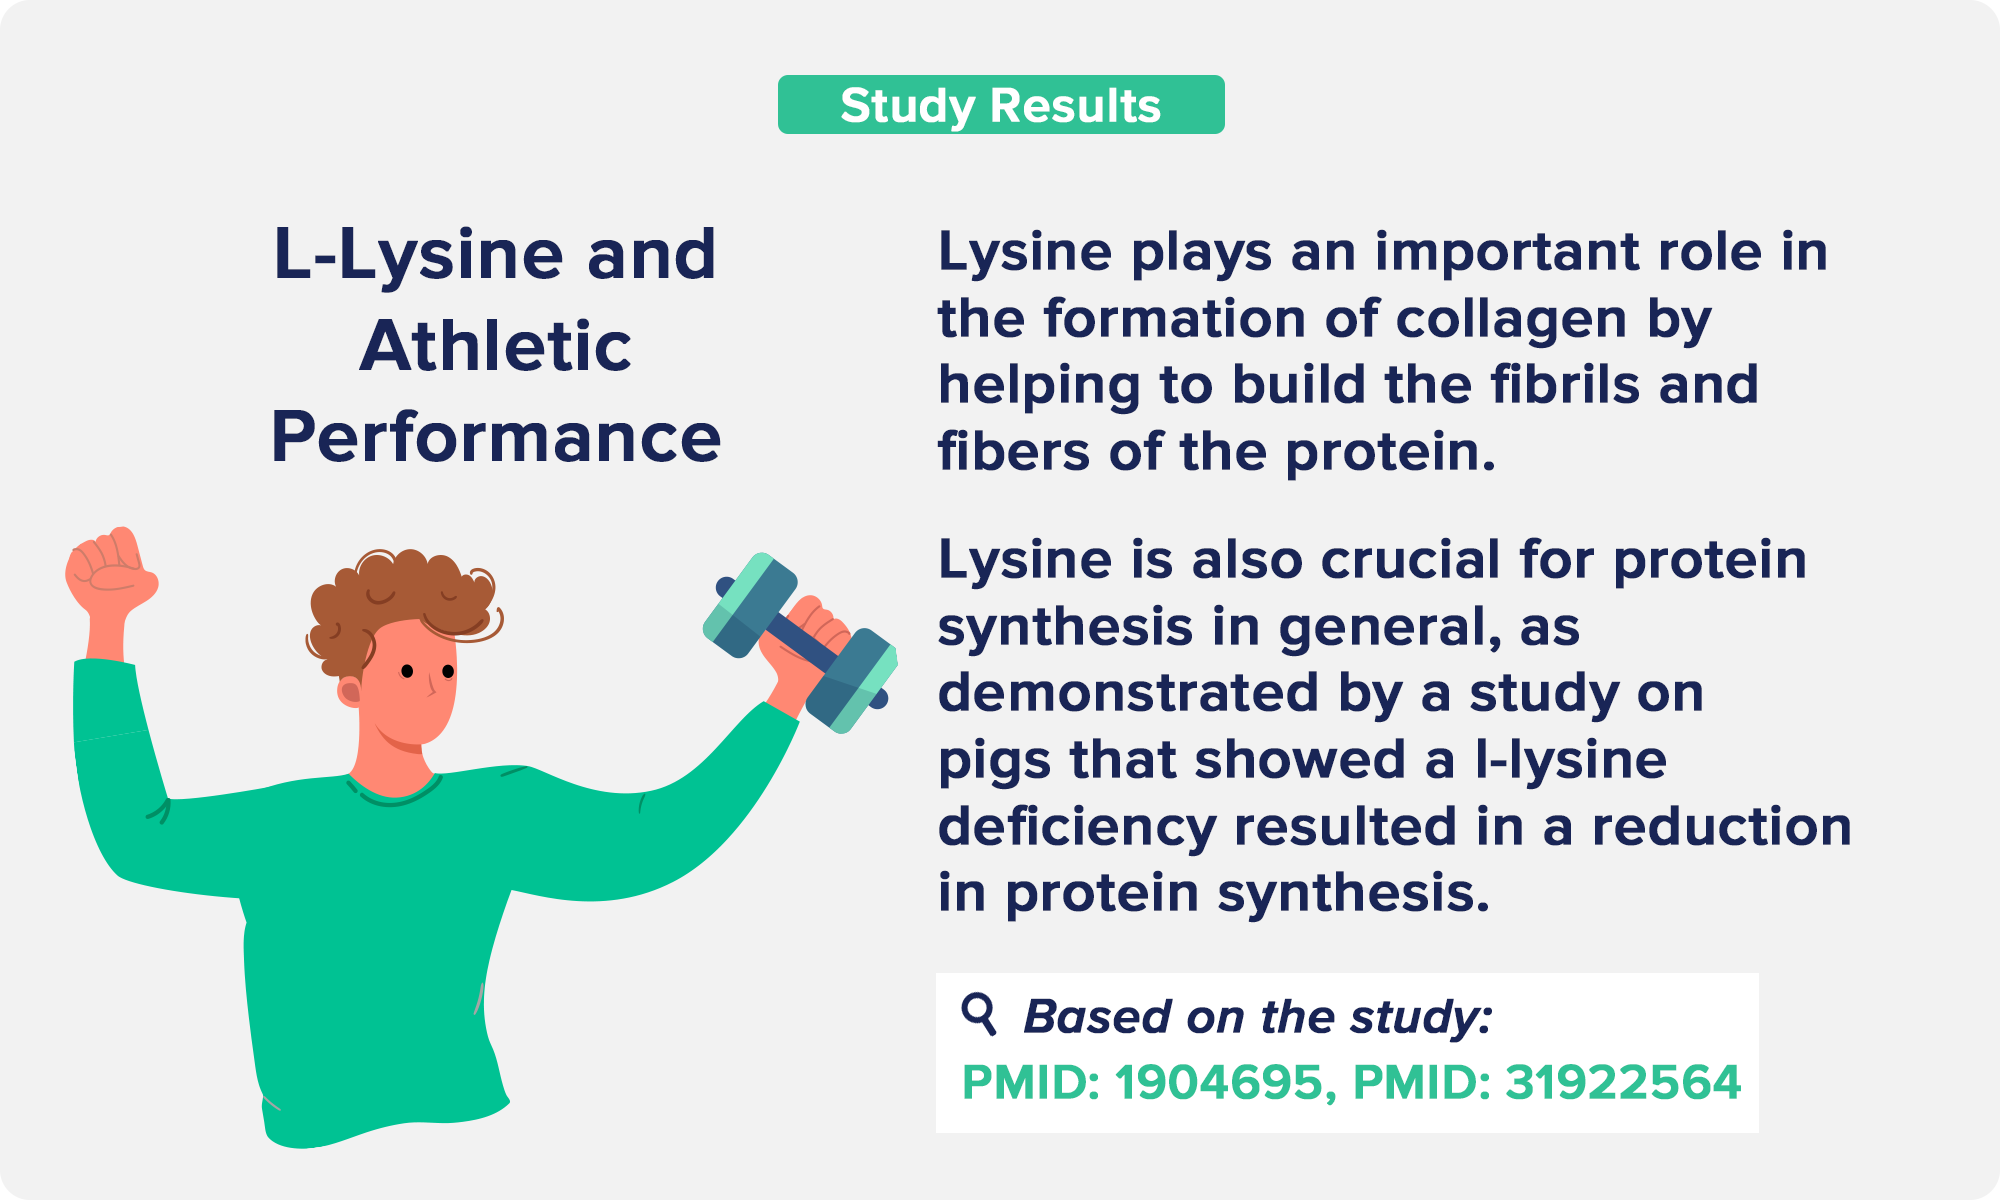 L-Lysine and Athletic Performance